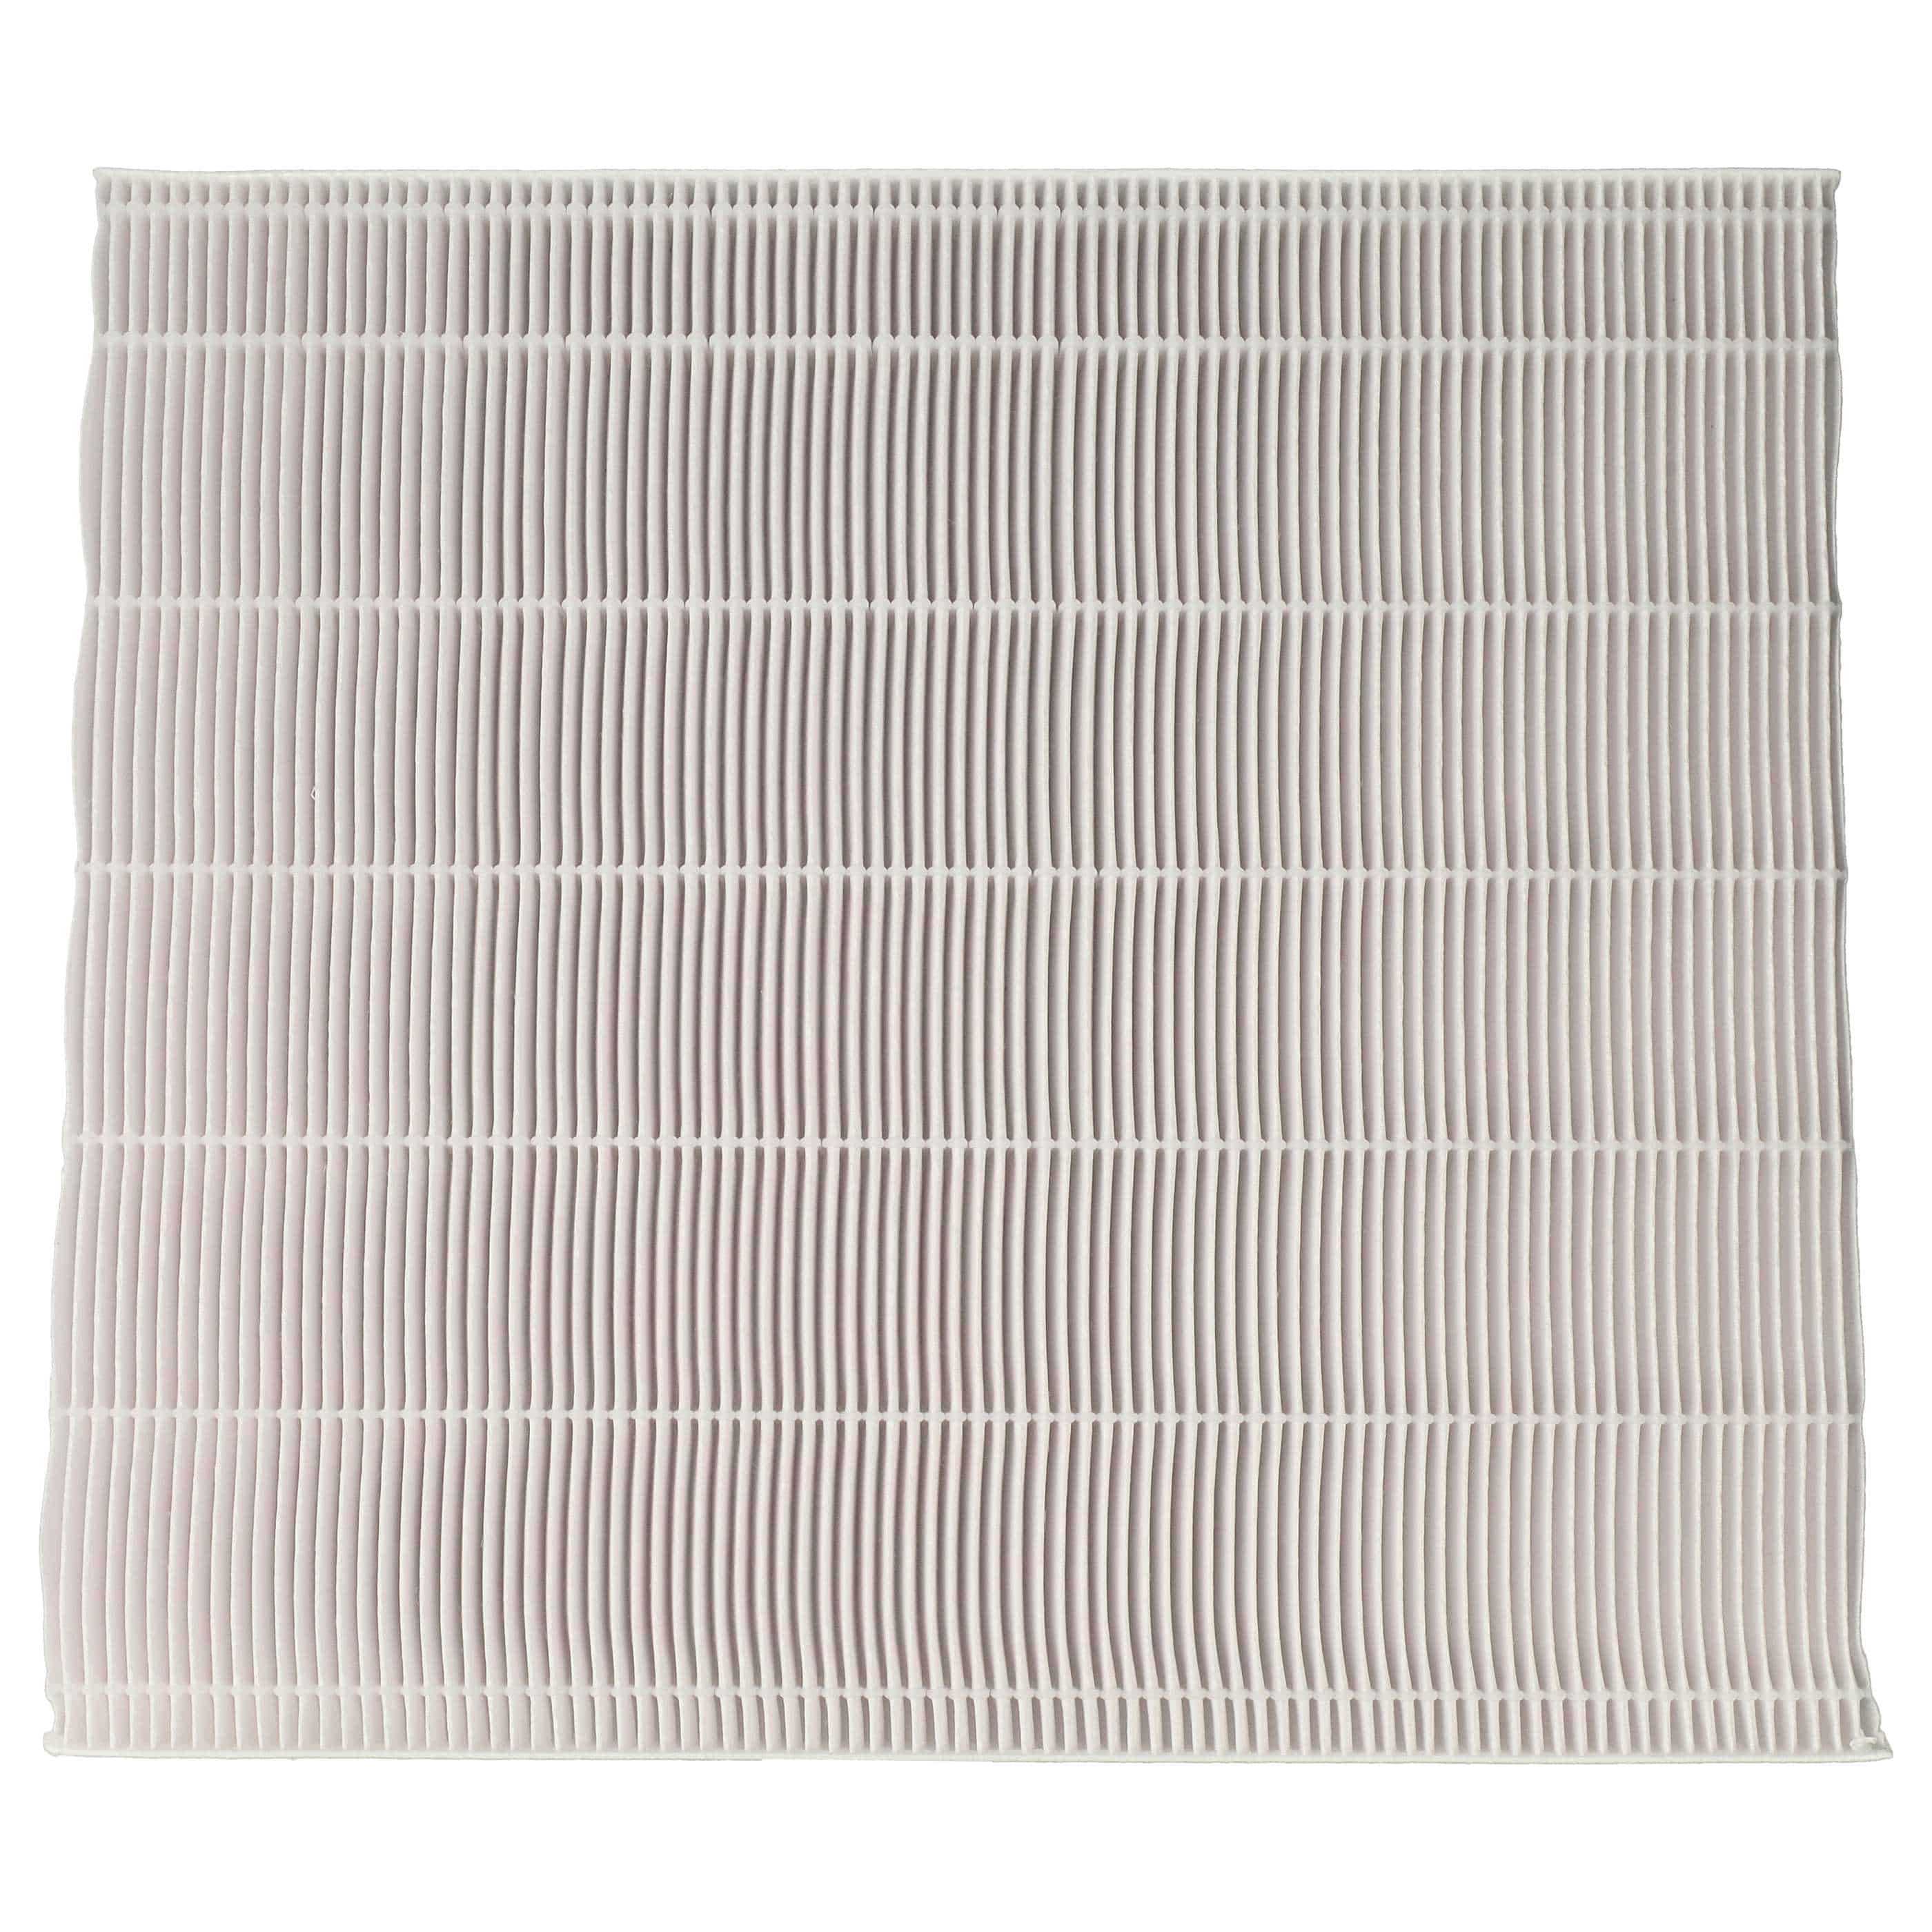 Filter Set replaces DeLonghi 5537000900 for air purifier - HEPA filter, activated carbon filter, pre-filter